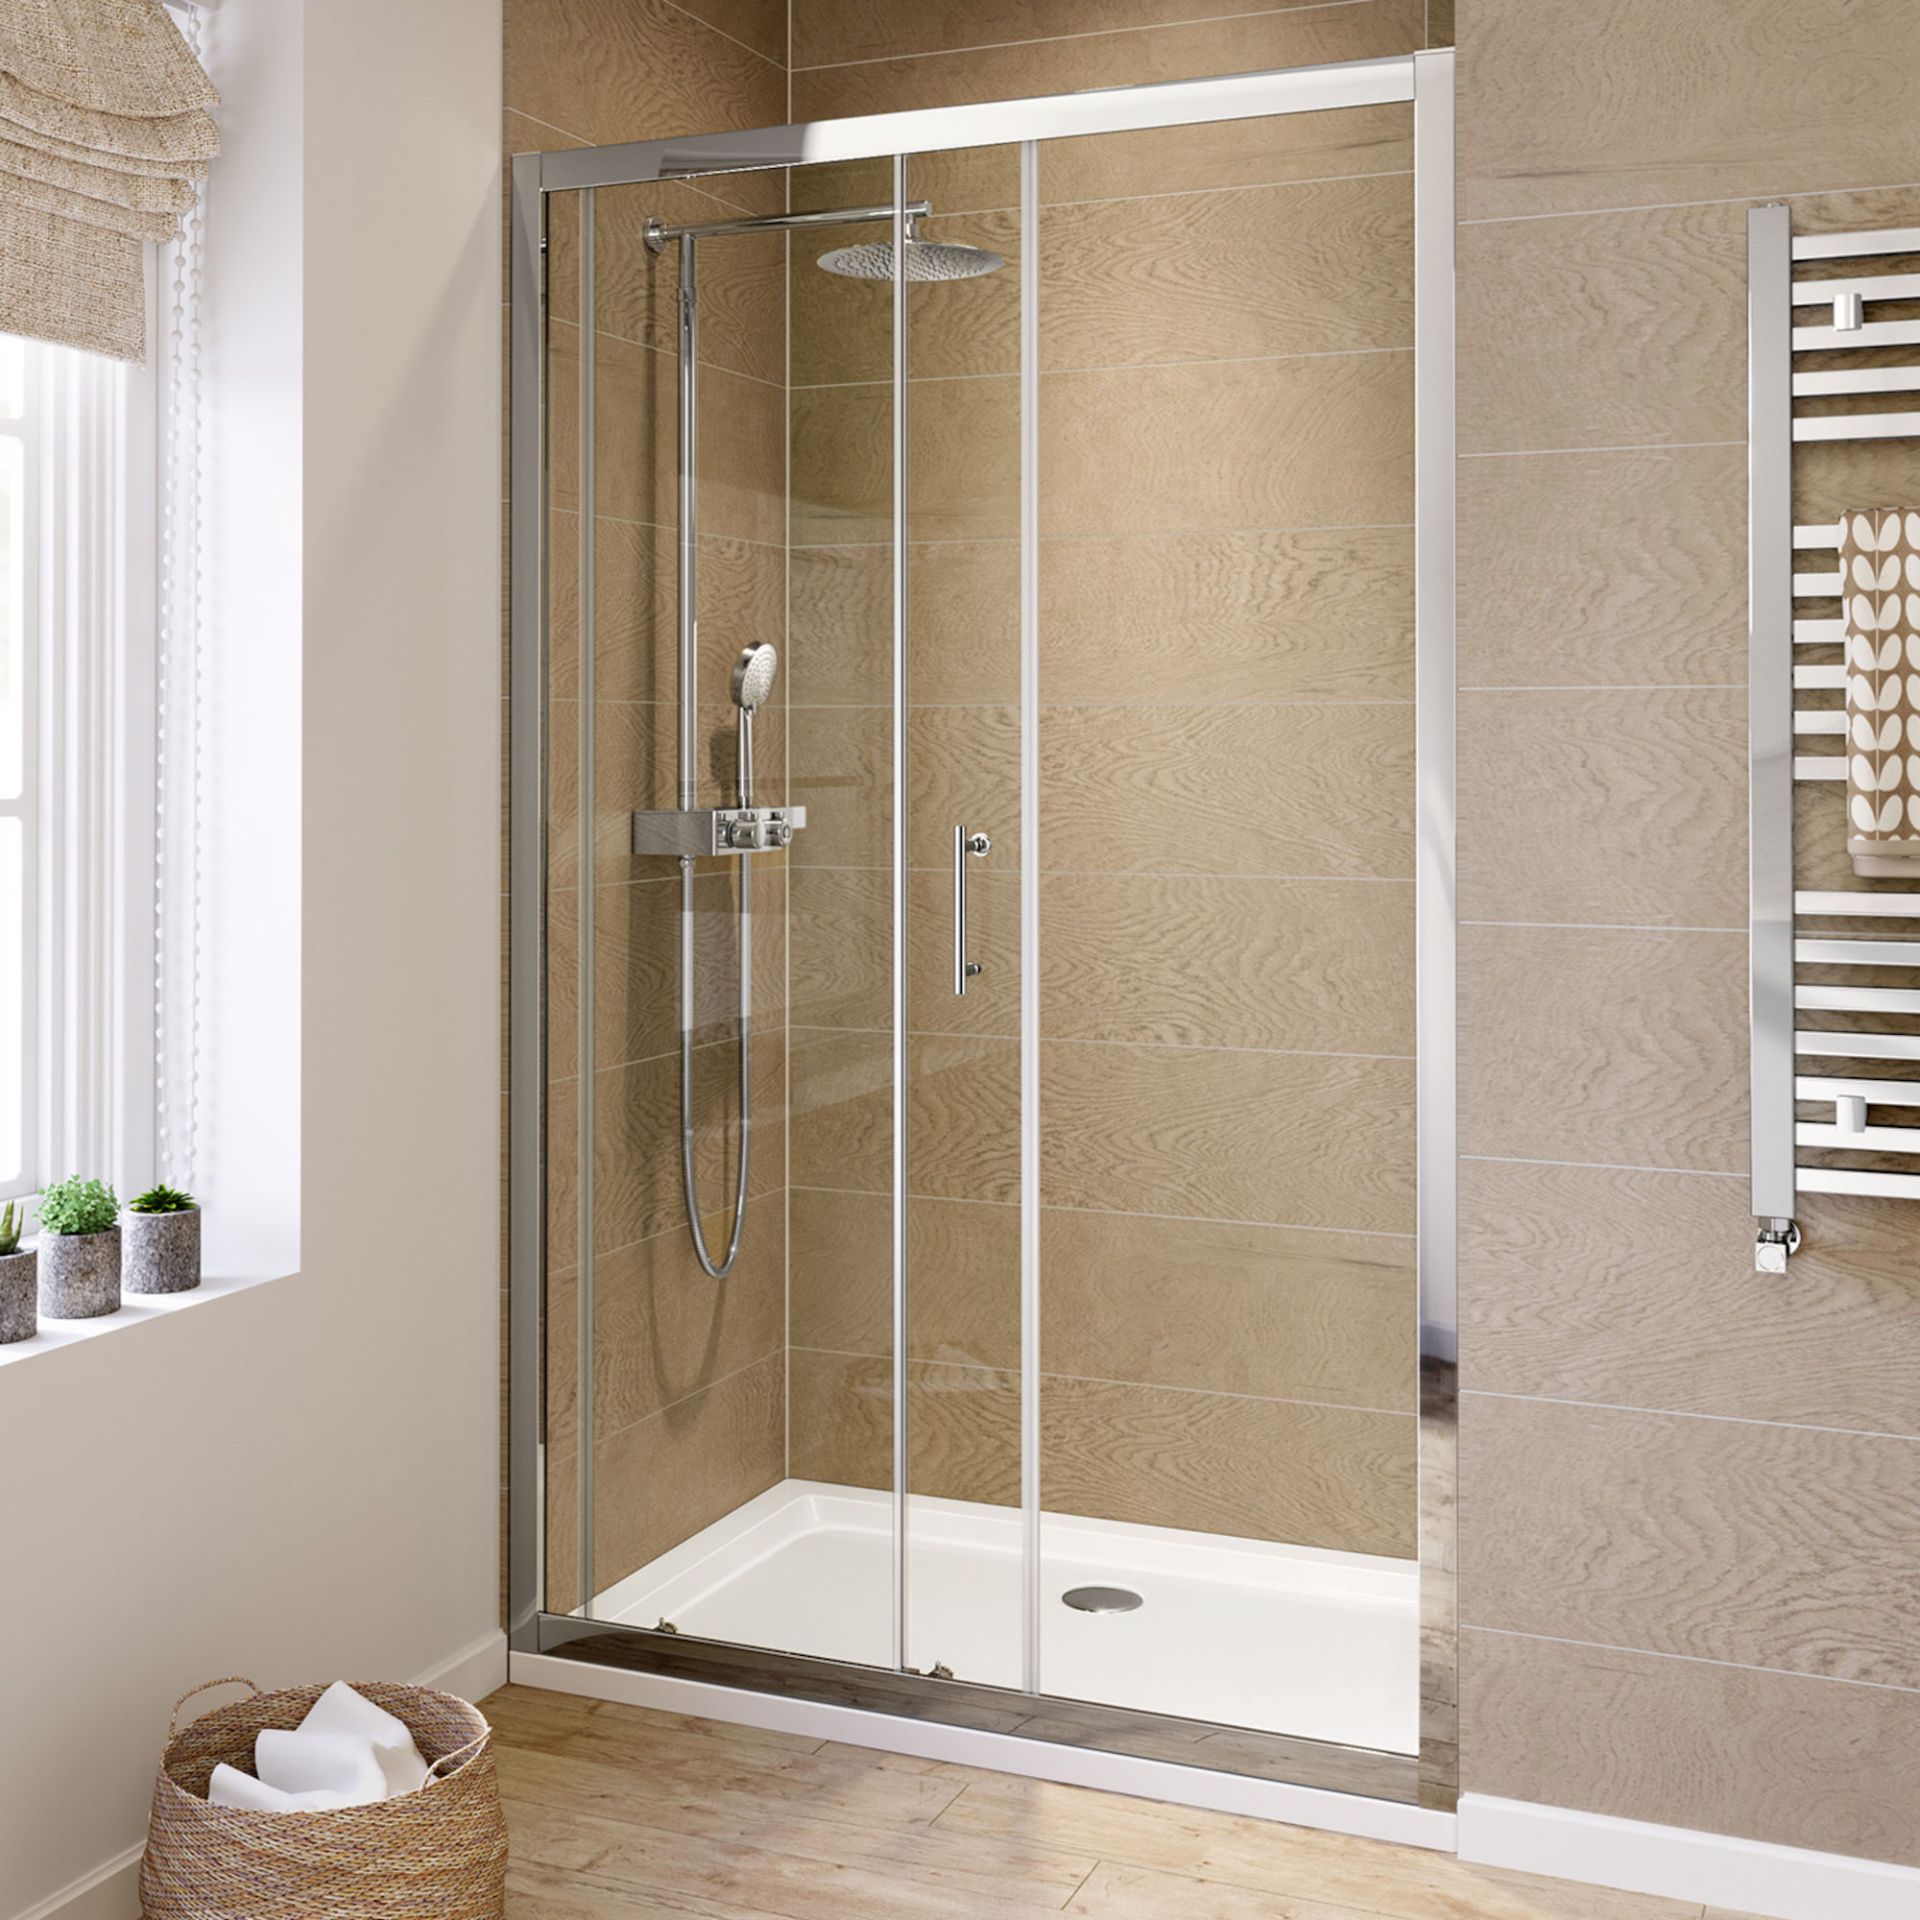 (XM150) 1200mm - 6mm - Elements Sliding Shower Door. RRP £299.99. 6mm Safety Glass Fully - Image 2 of 3